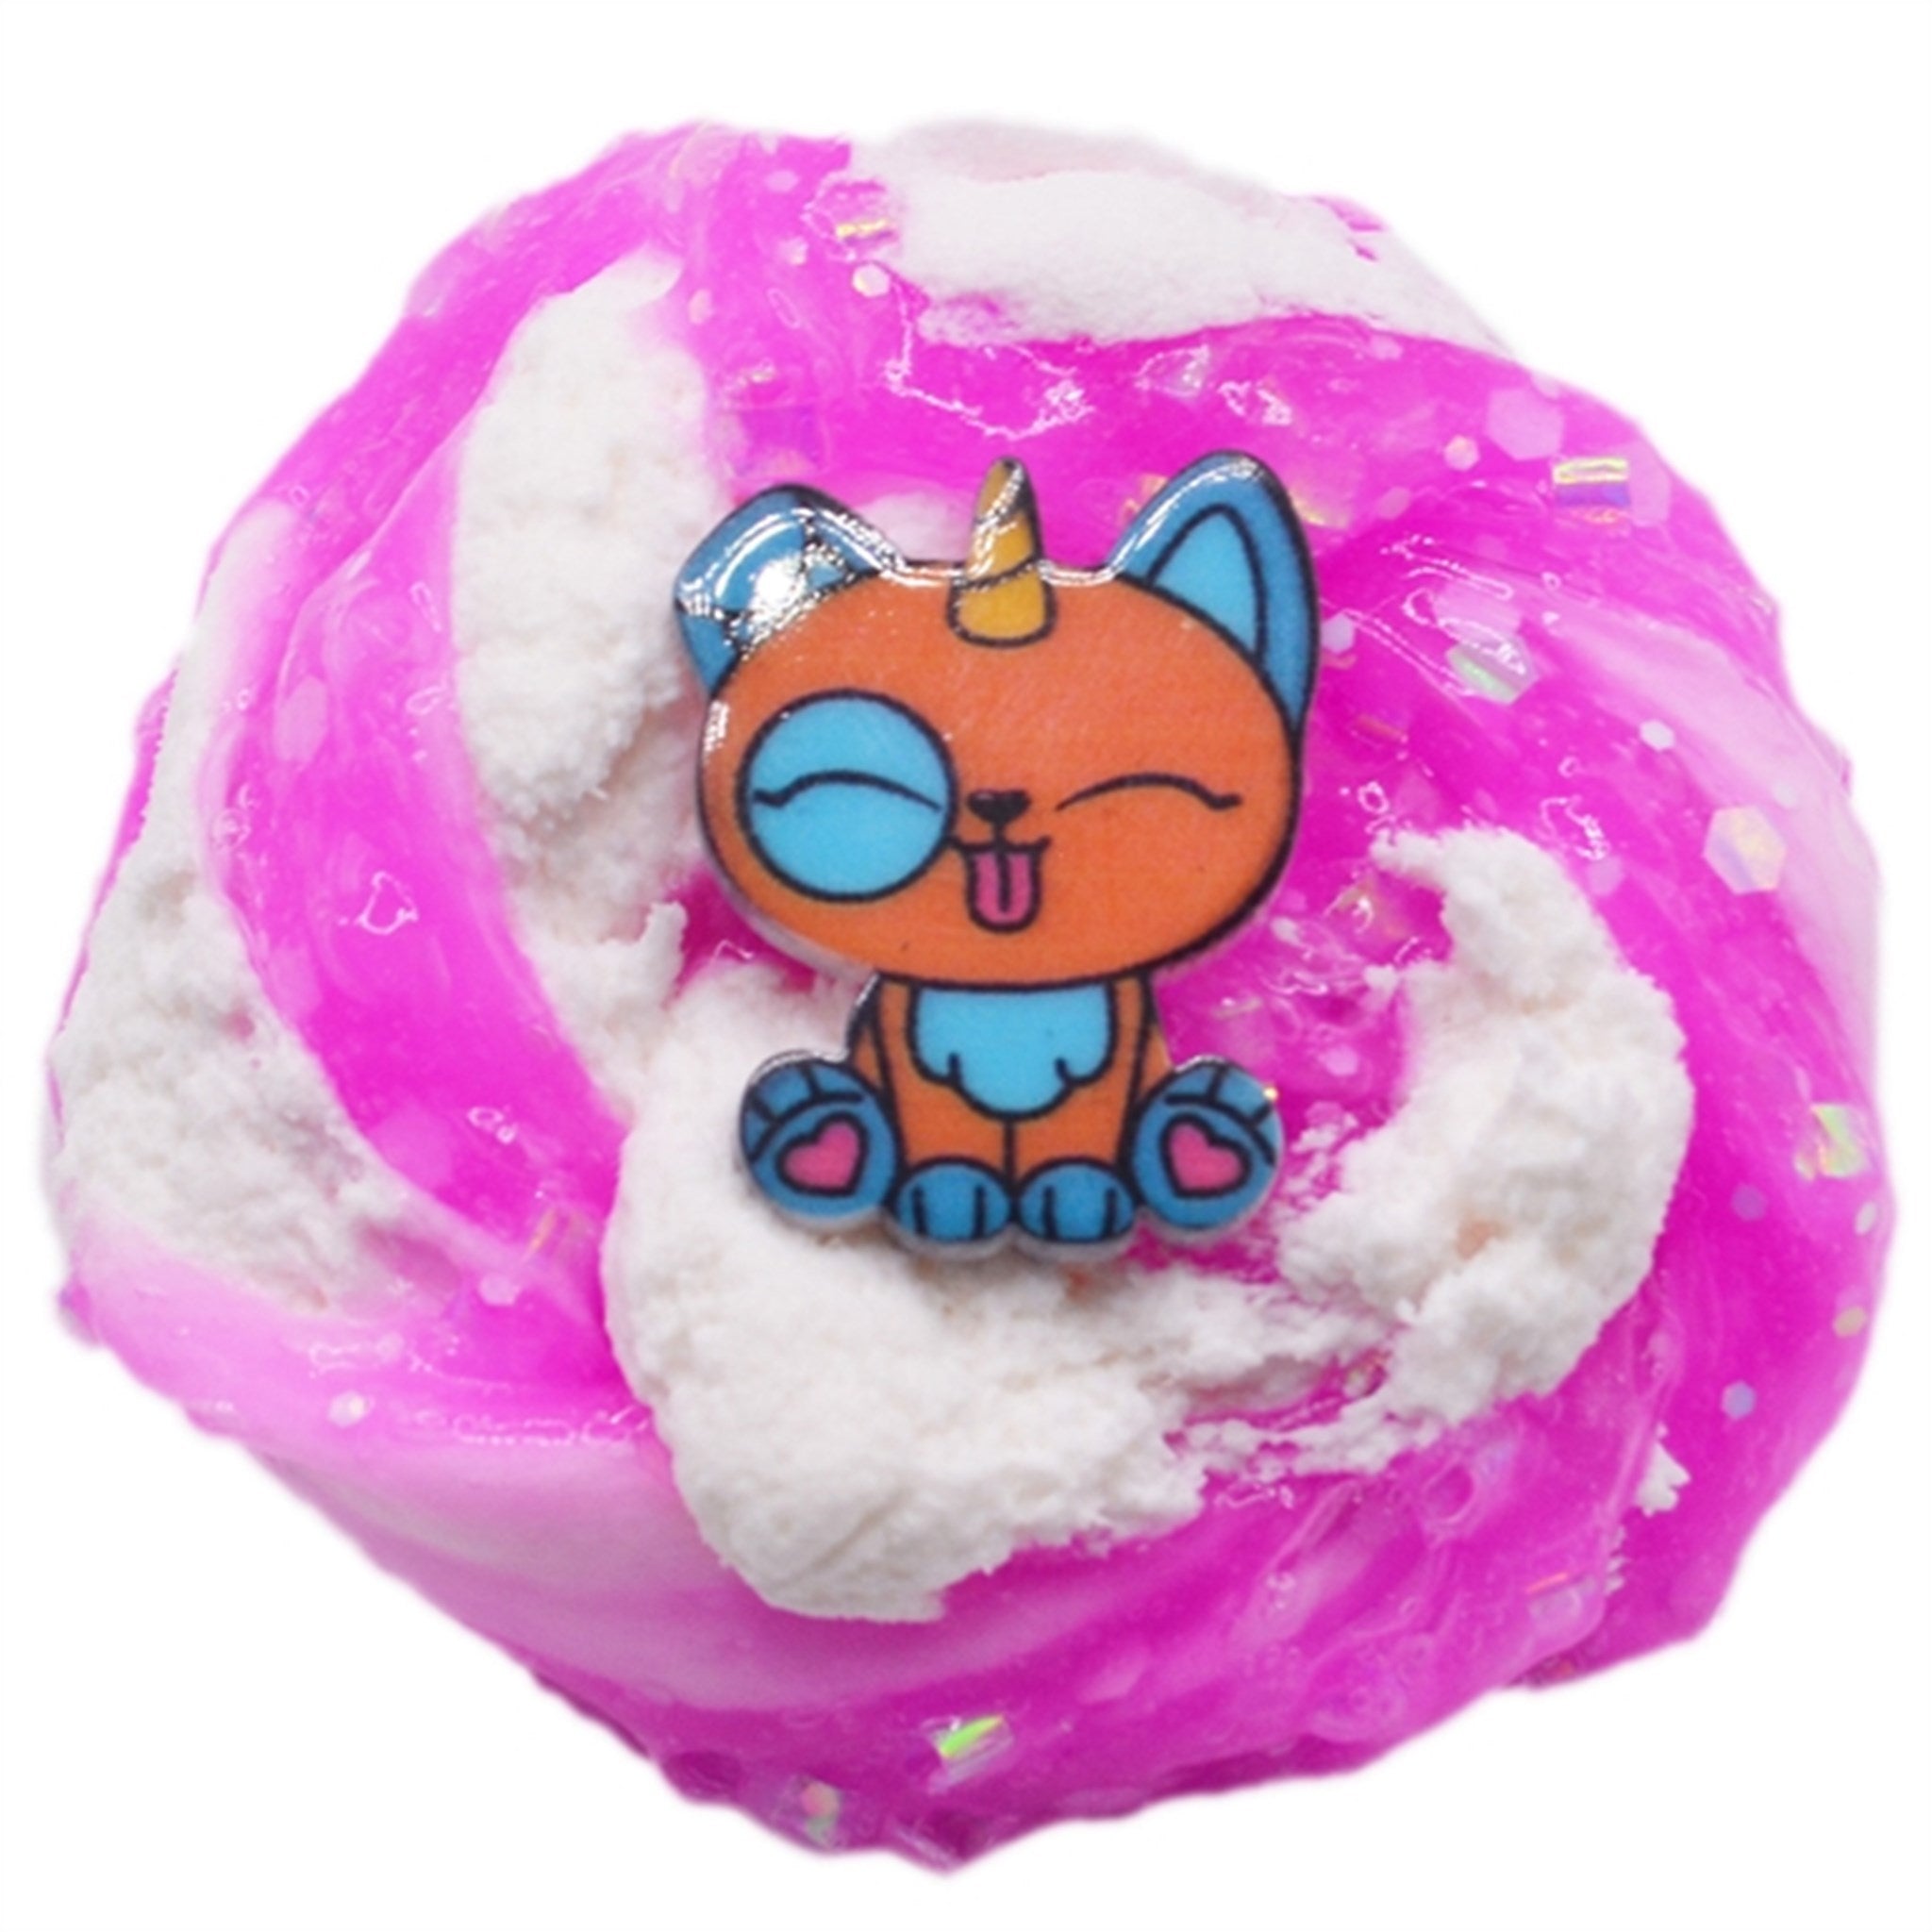 Compound Kings Scented Slime Bingsu Cuties Vanilla Frosted 4